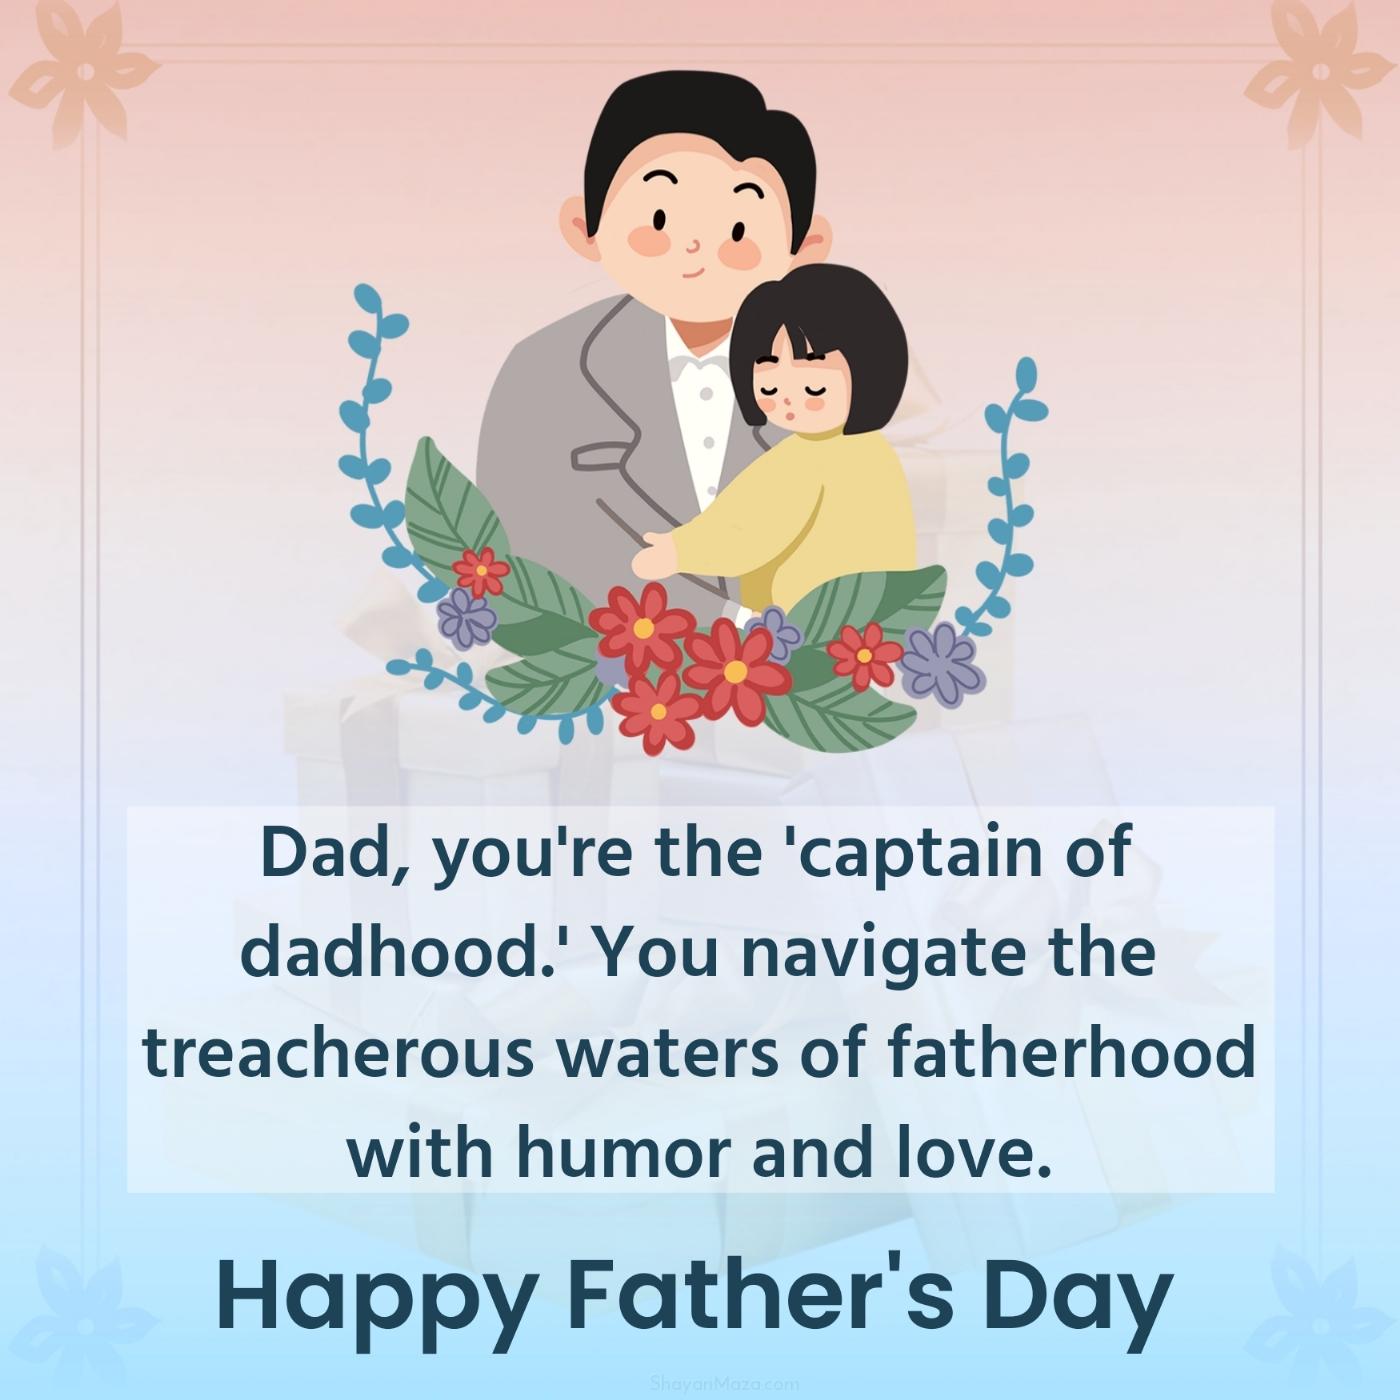 Dad you're the 'captain of dadhood'